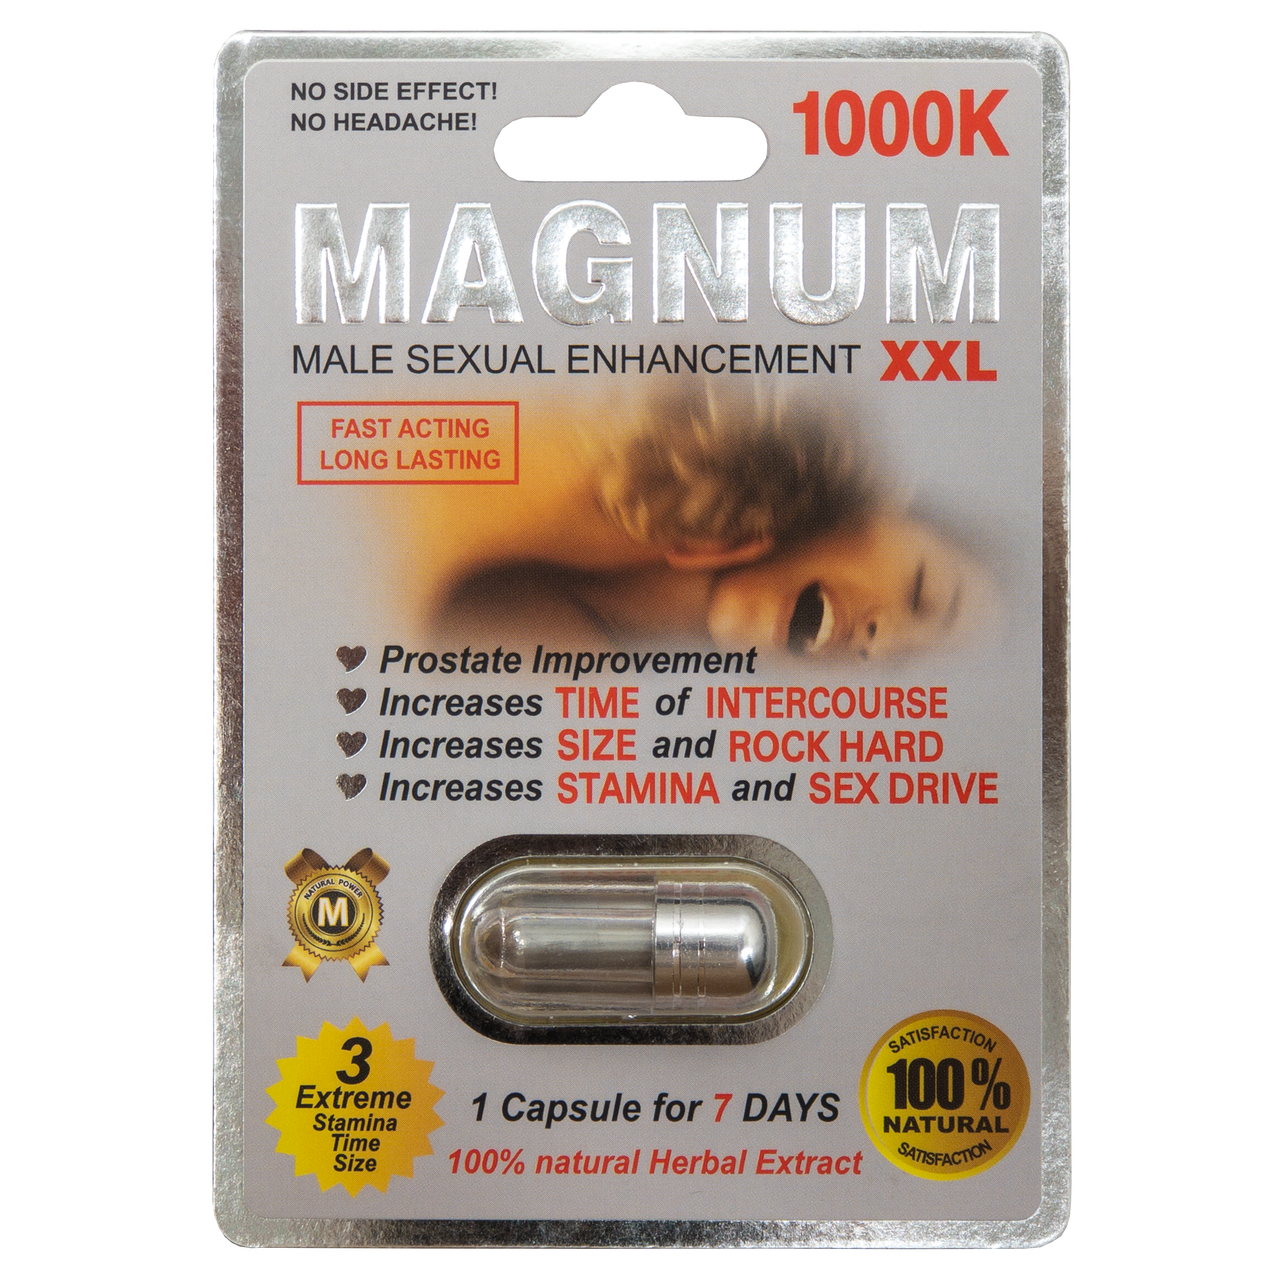 Do you want a harder, larger, longer-lasting erection? We designed our Magnum line of sexual enhancement pills to boost your size and pleasure. Enjoy intense orgasms today! 